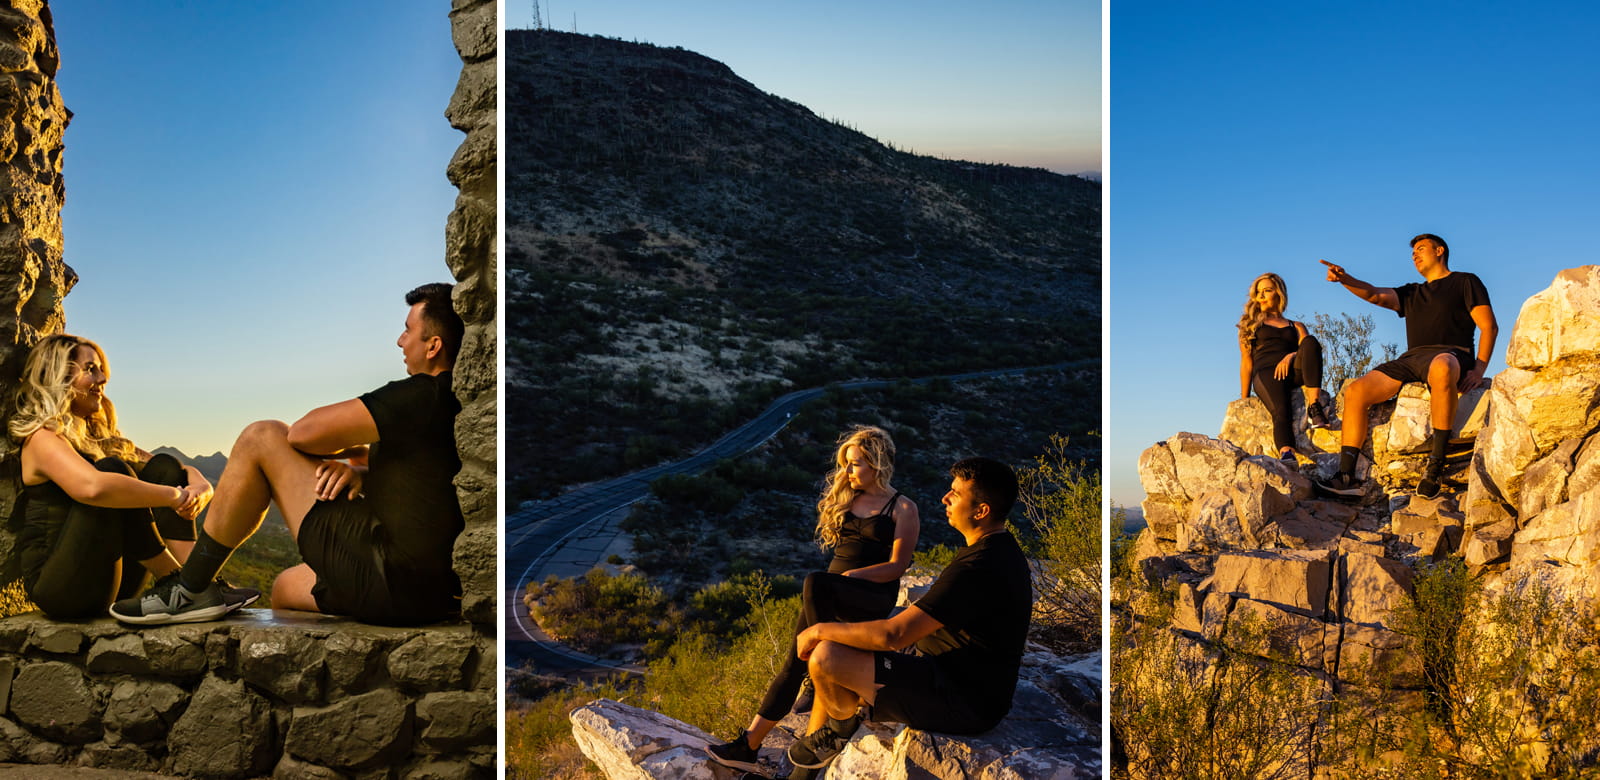 Three side-by-side images show two people hiking in Sentinel Peak in Tucson.